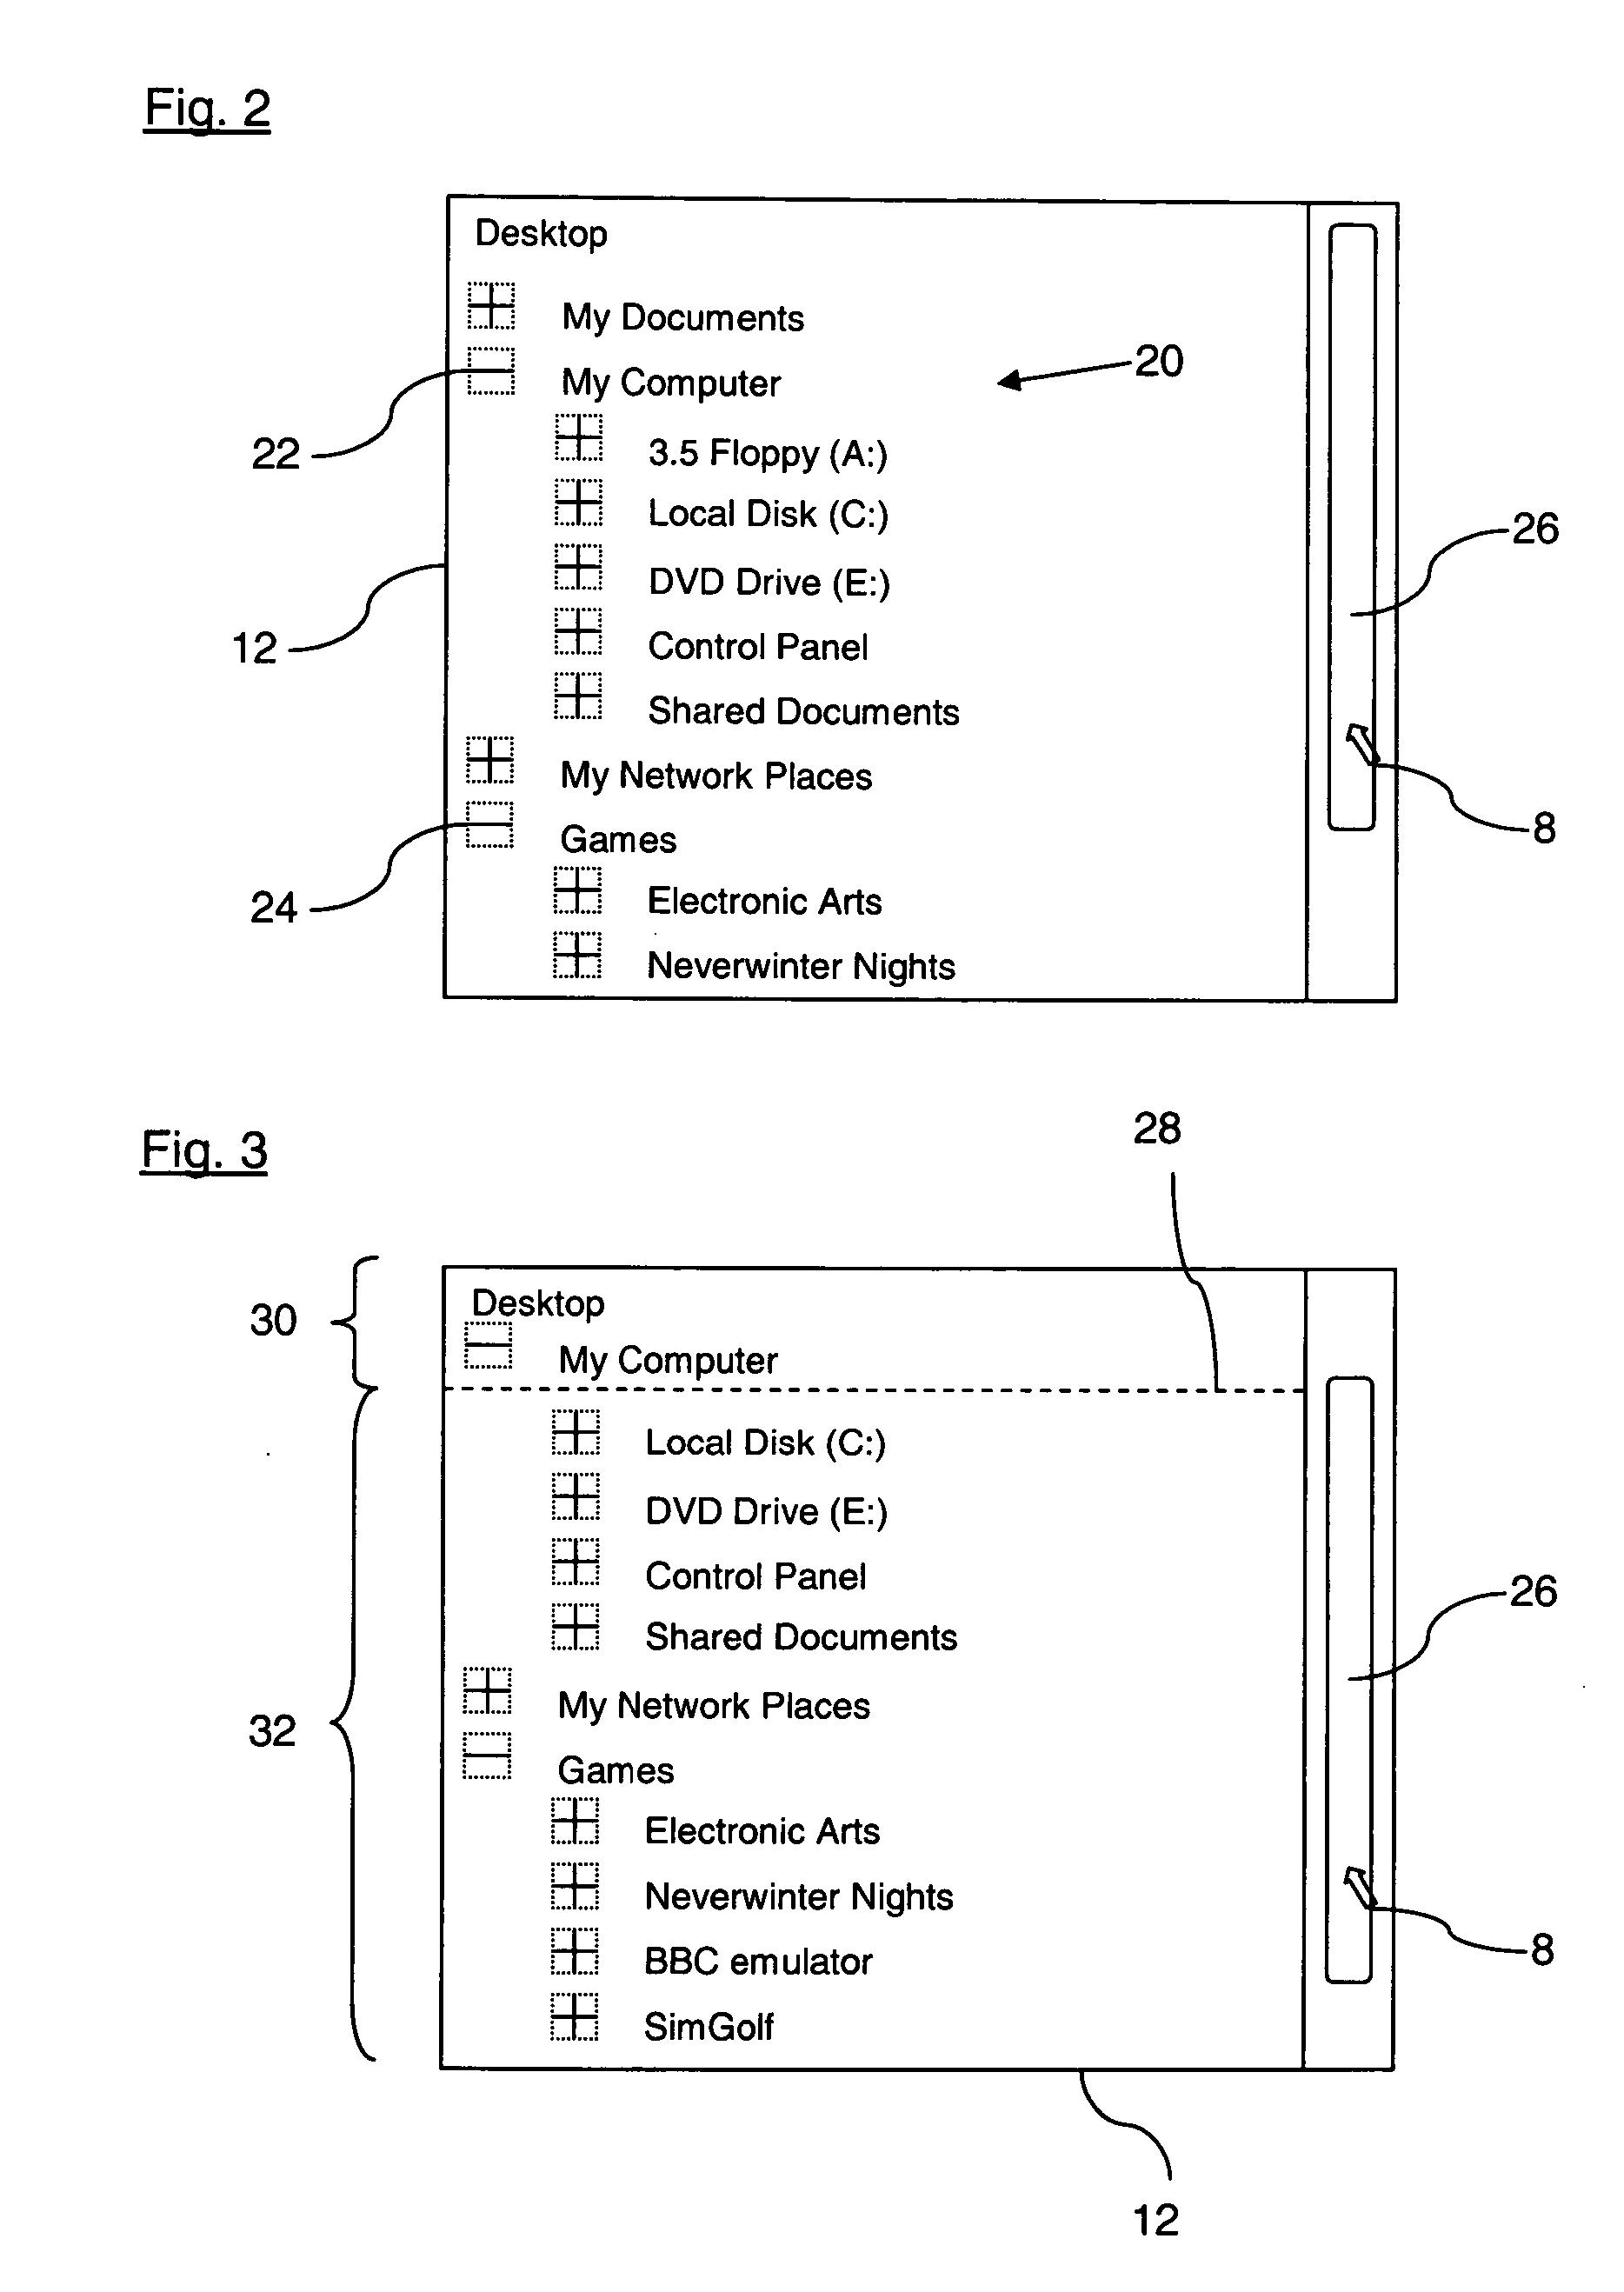 System and method for displaying a graphical tree hierarchy